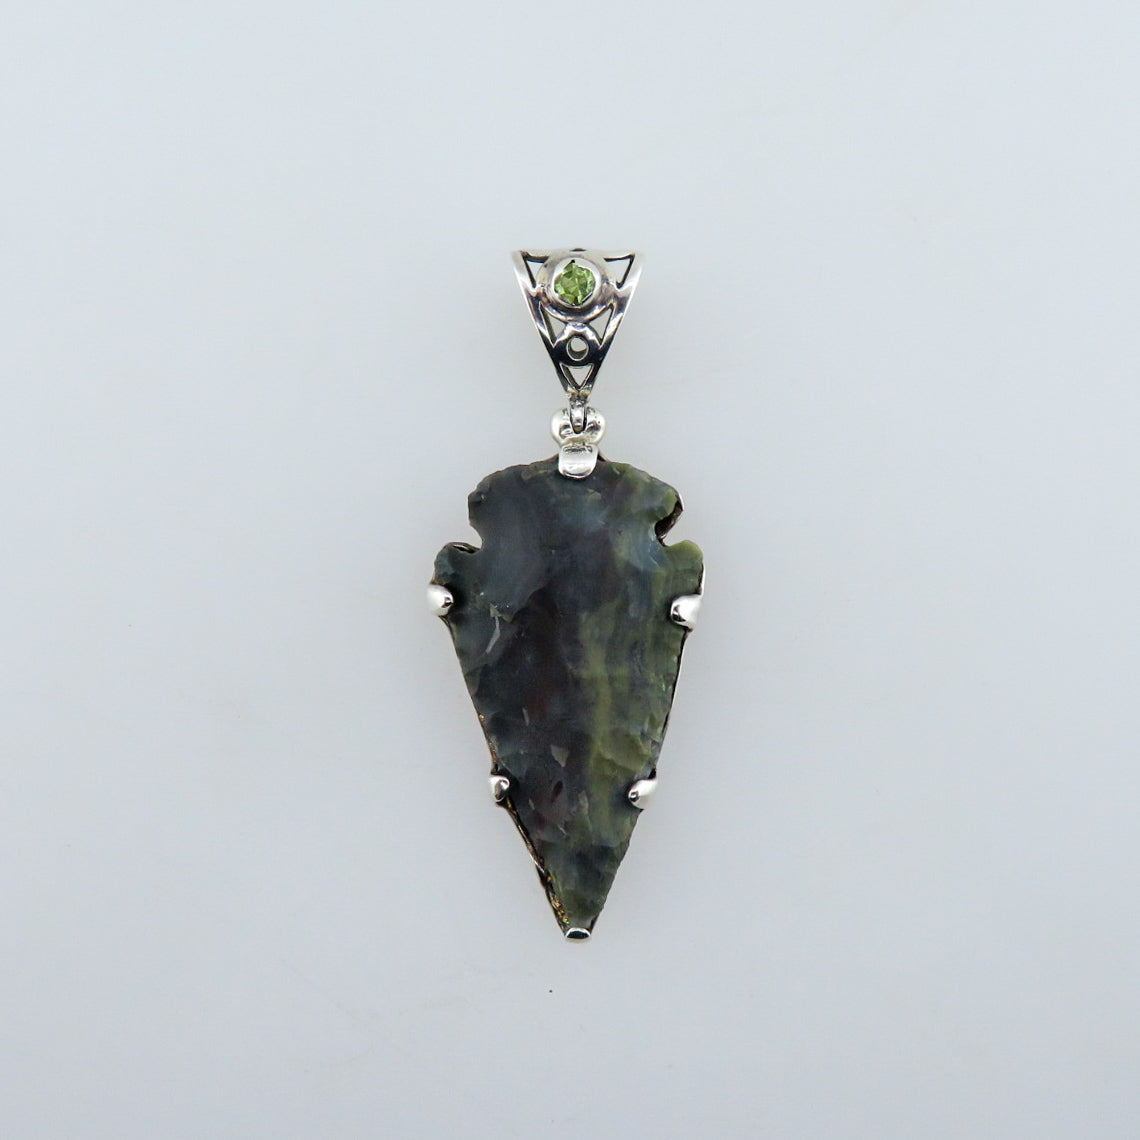 Jasper (Arrow Head) Pendant with Sterling Silver and Peridot